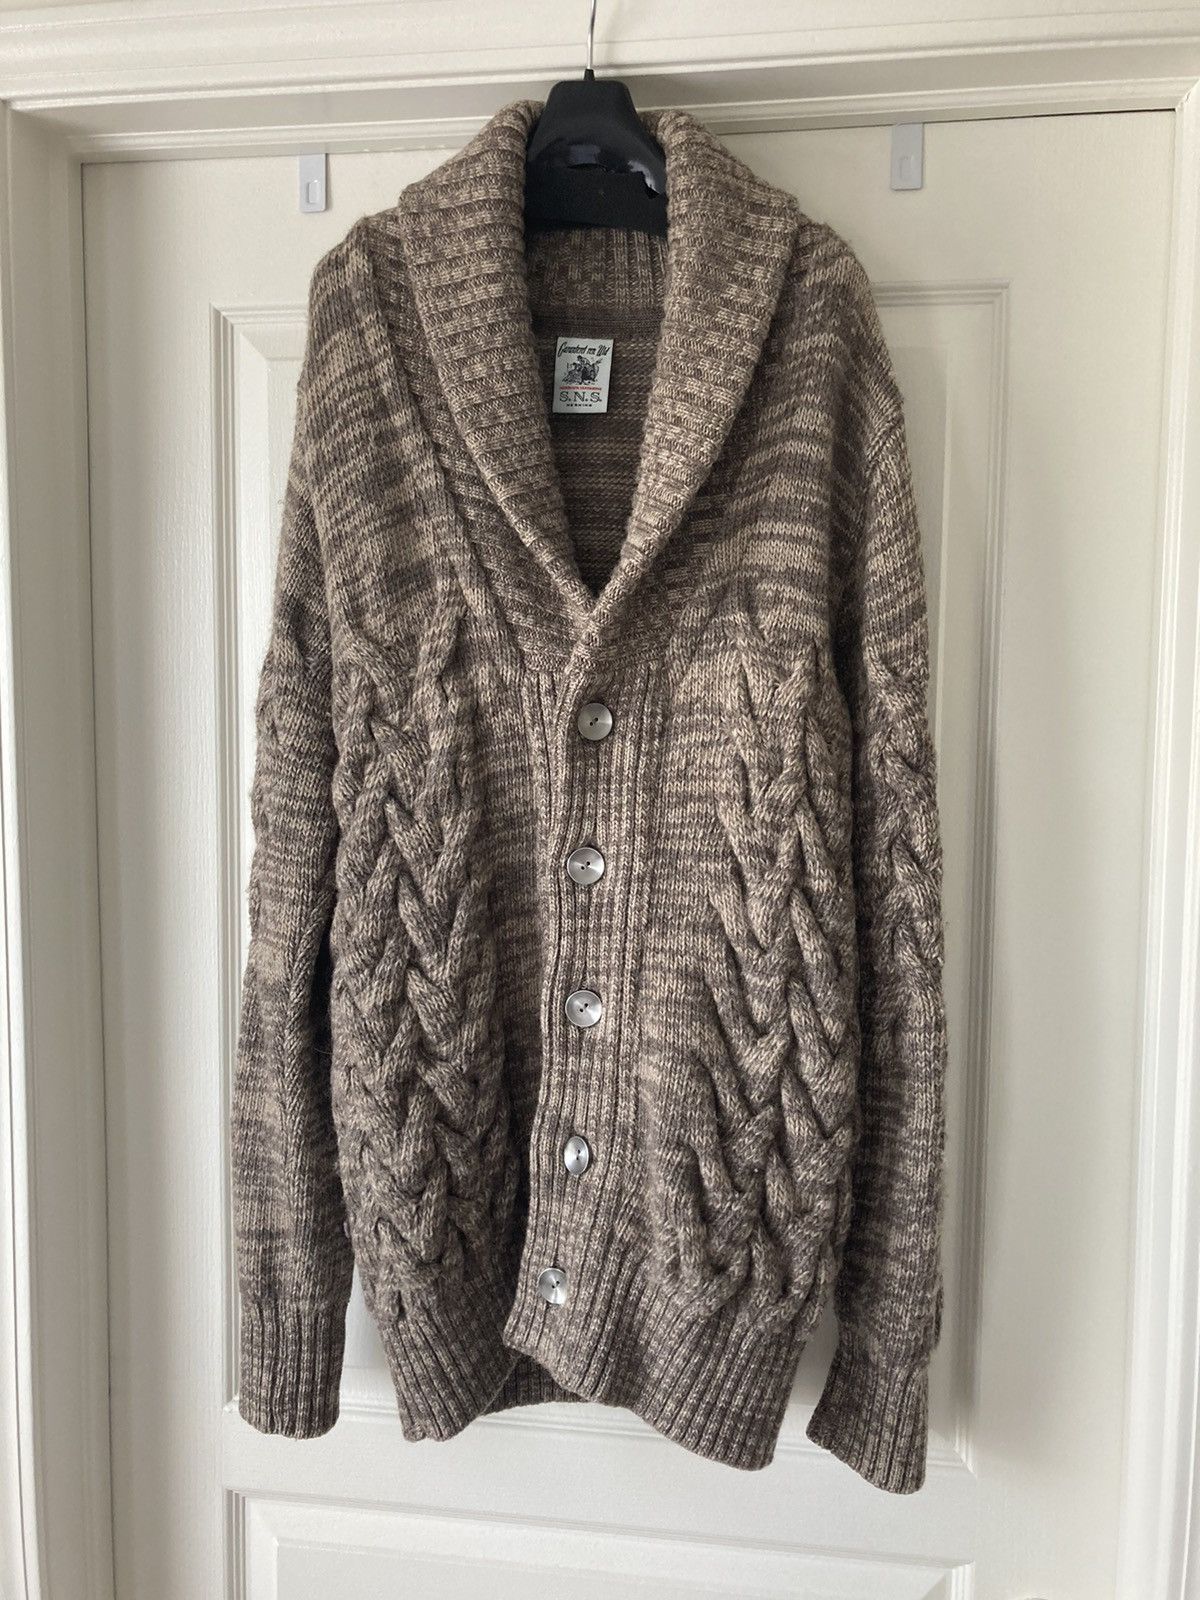 S.N.S. Herning Long cardigan cable knit Size US S / EU 44-46 / 1 - 2 Preview